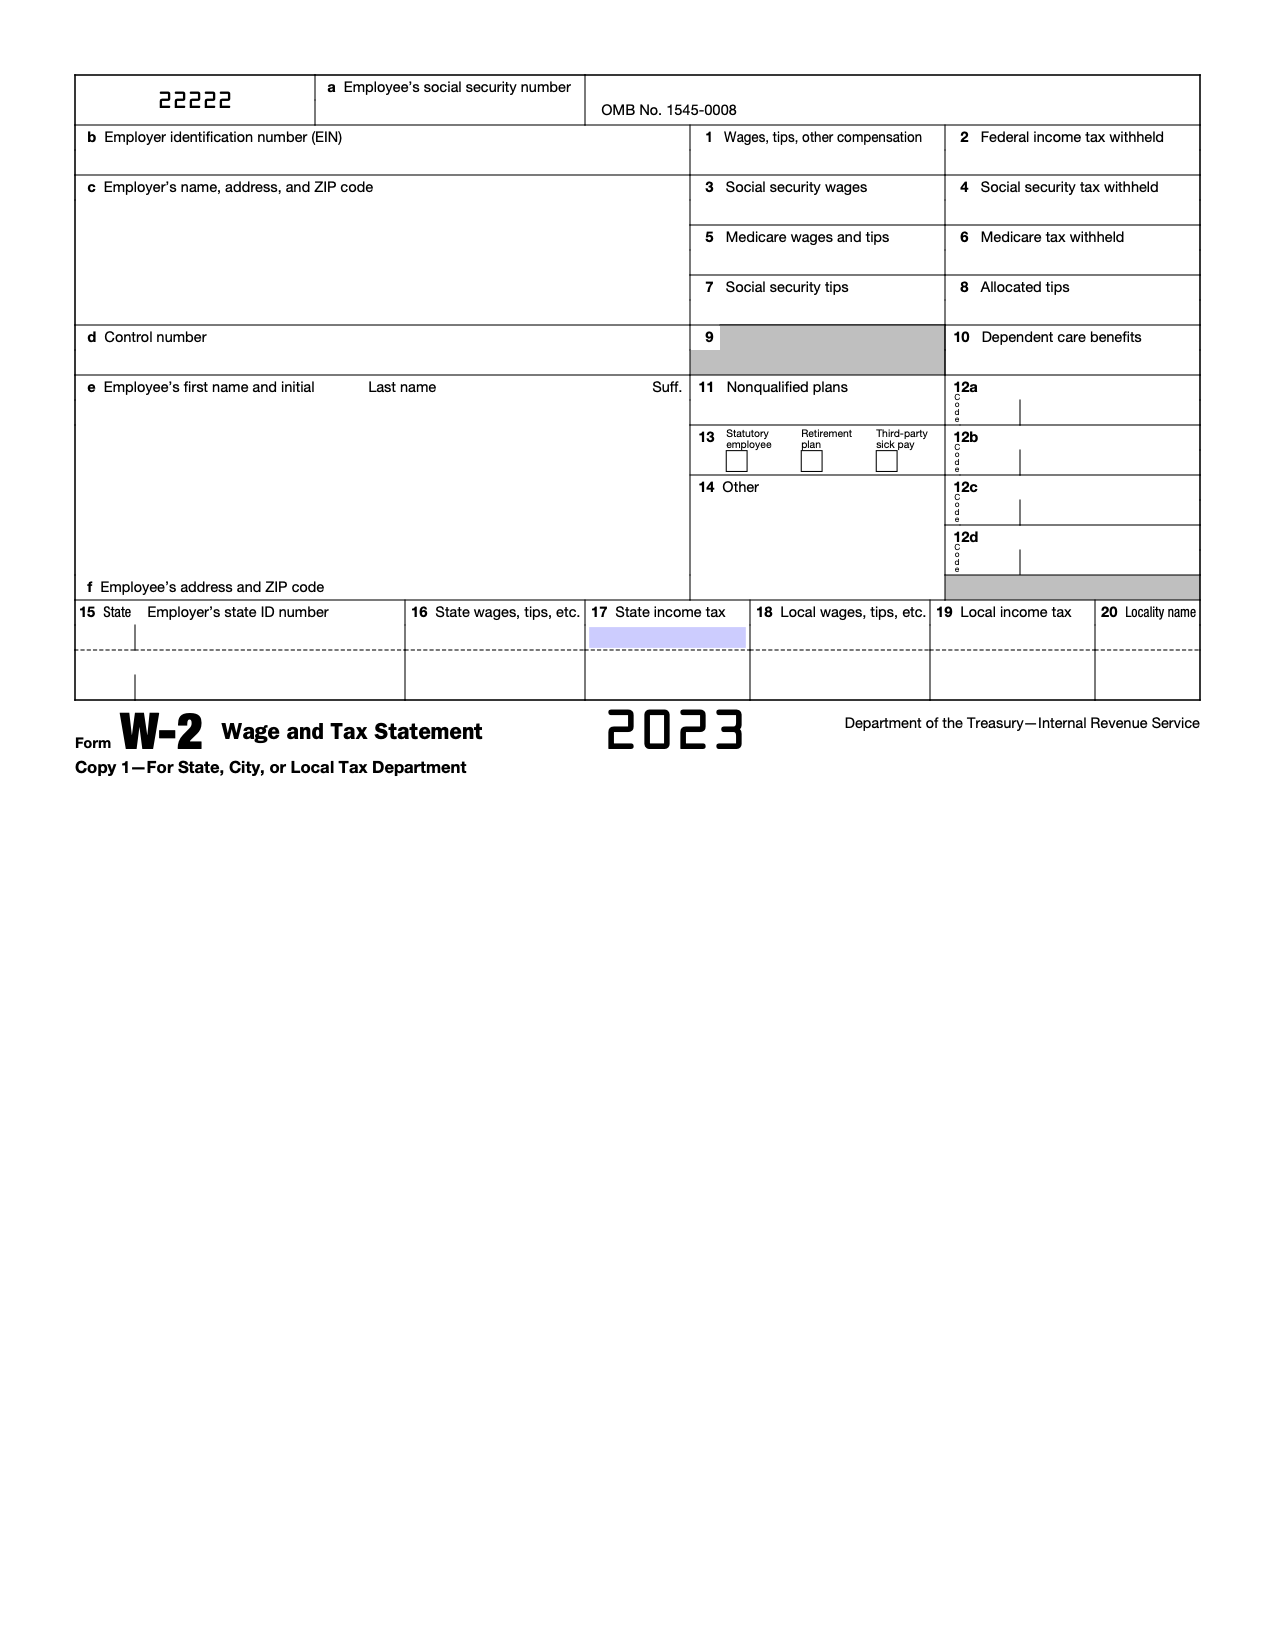 Free Irs Form W-2 | Wage And Tax Statement - Pdf – Eforms throughout Irs Form W2